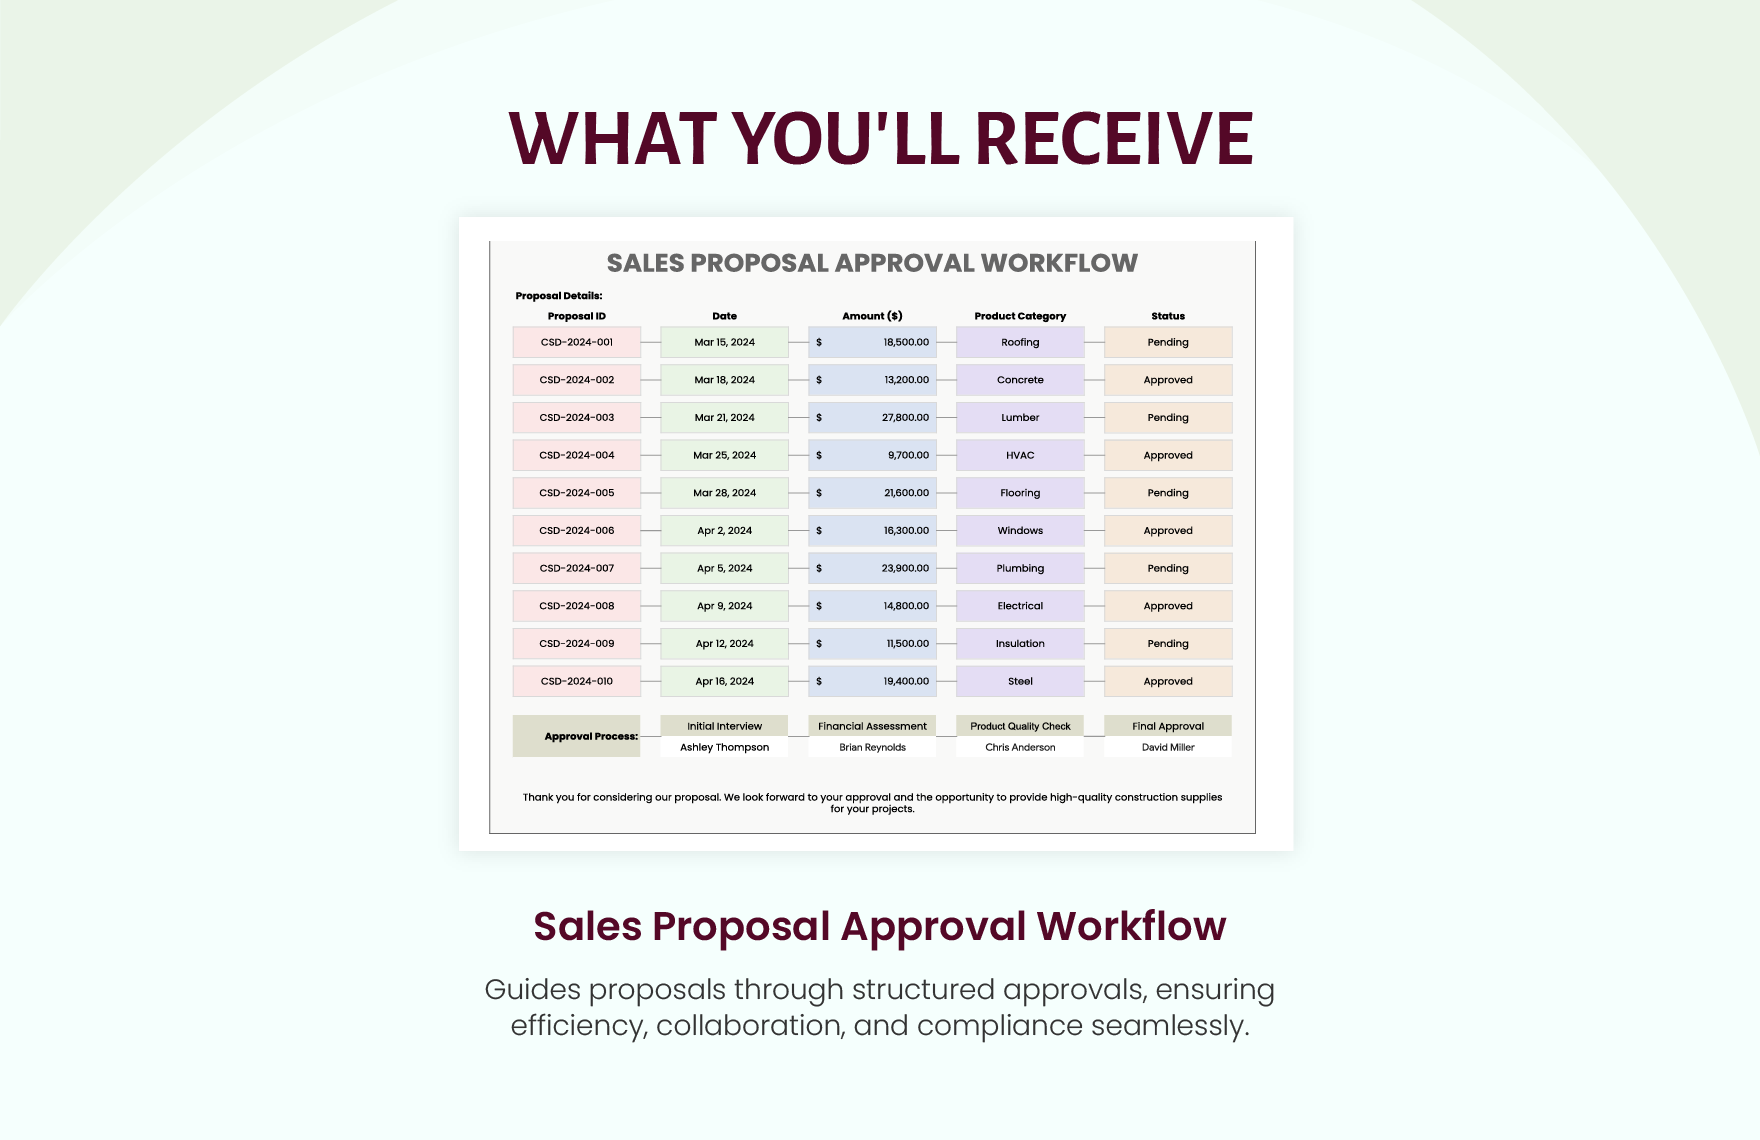 Sales Proposal Approval Workflow Template